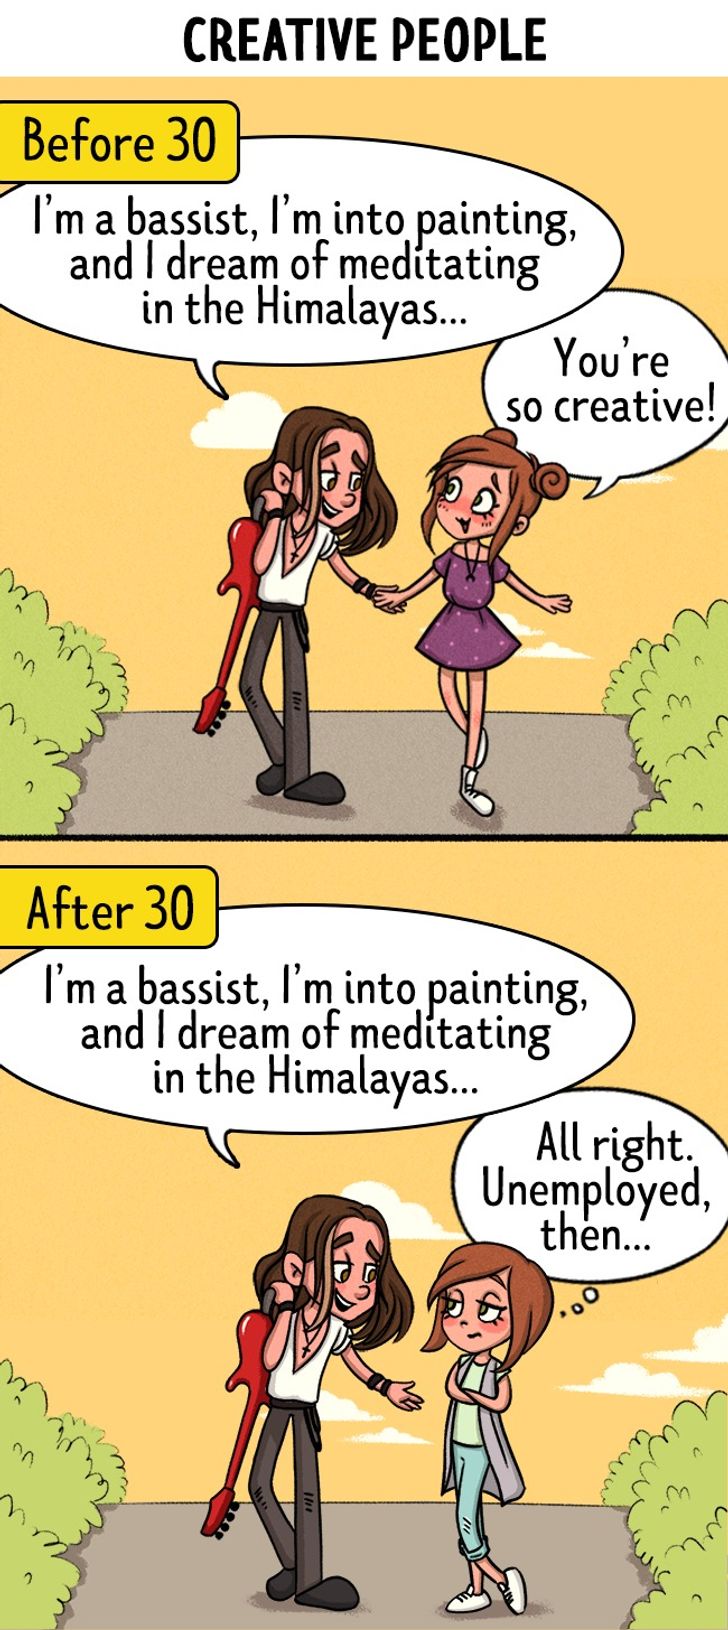 13 Comics Showing What Love Looks Like Before and After 30